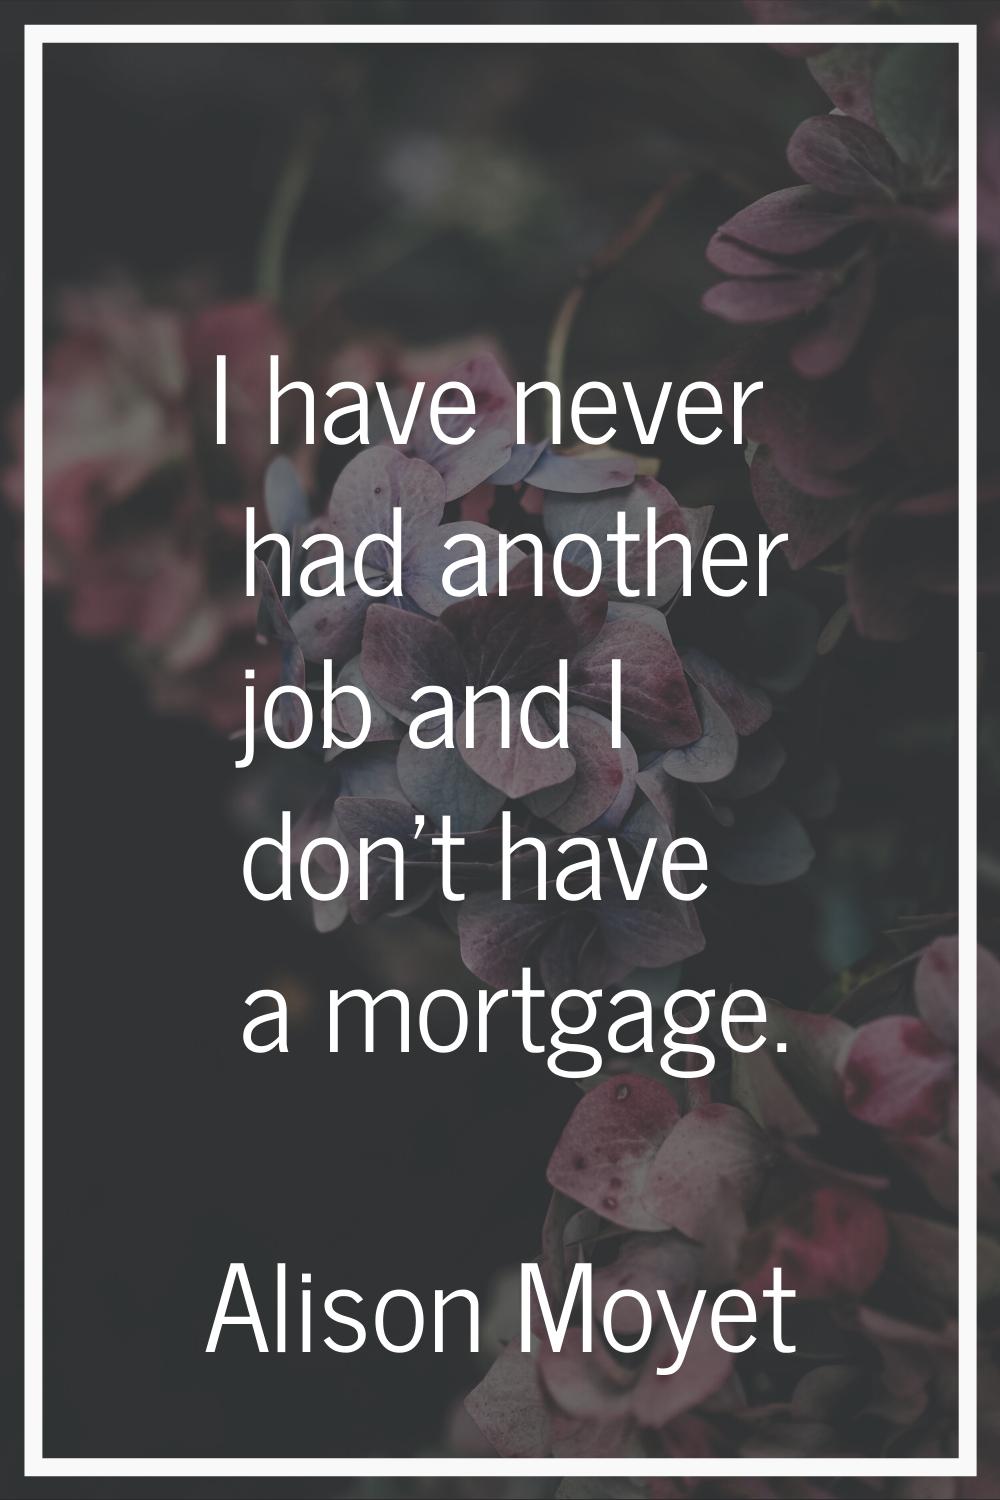 I have never had another job and I don't have a mortgage.